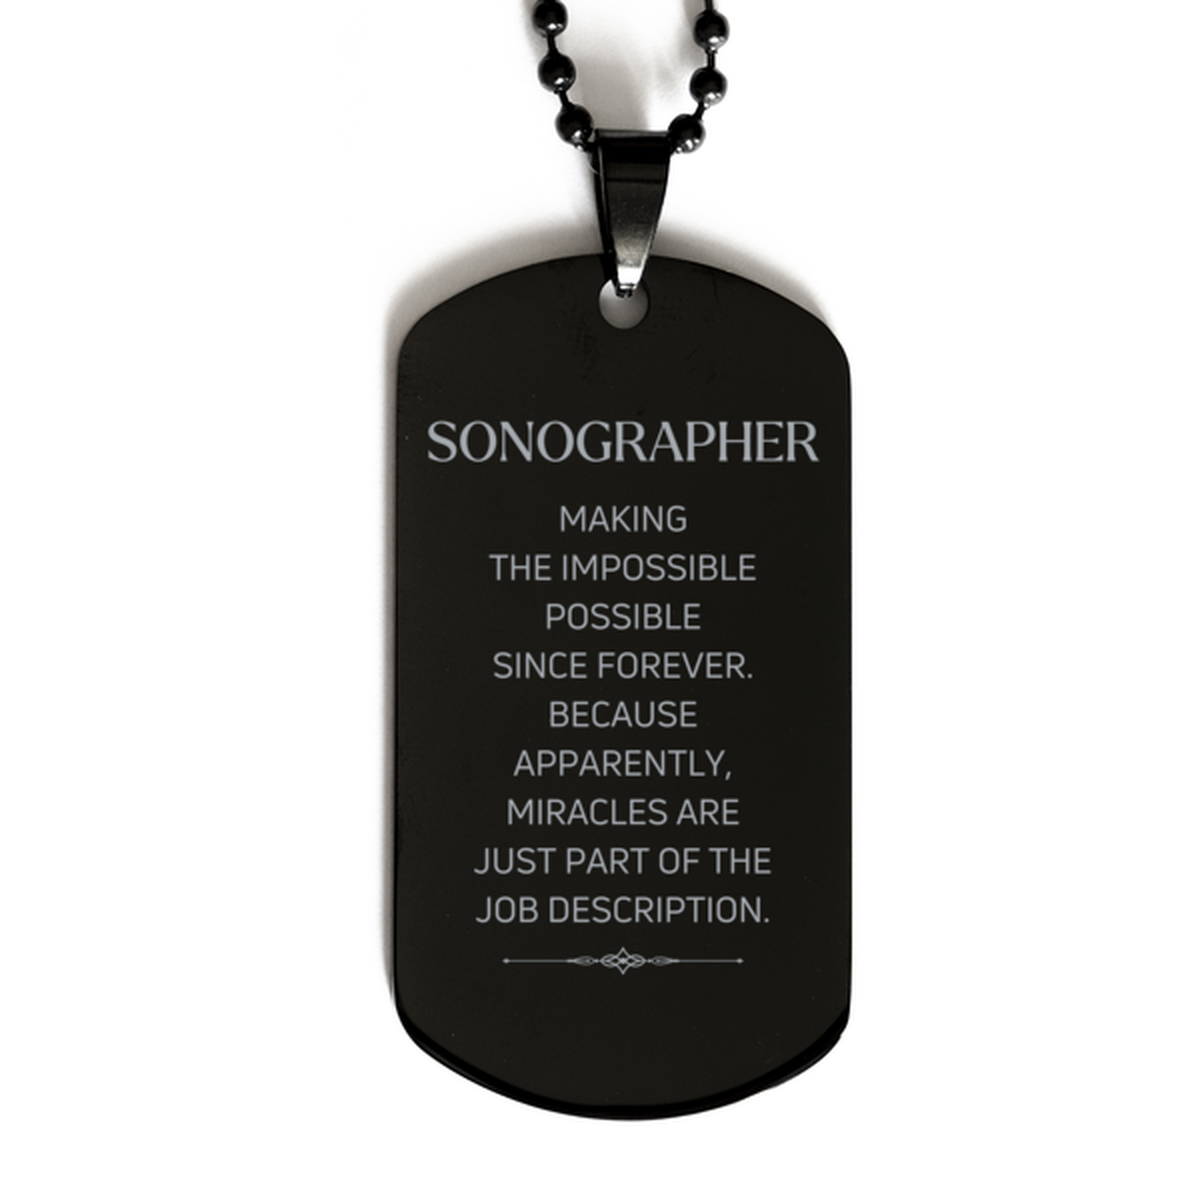 Funny Sonographer Gifts, Miracles are just part of the job description, Inspirational Birthday Black Dog Tag For Sonographer, Men, Women, Coworkers, Friends, Boss